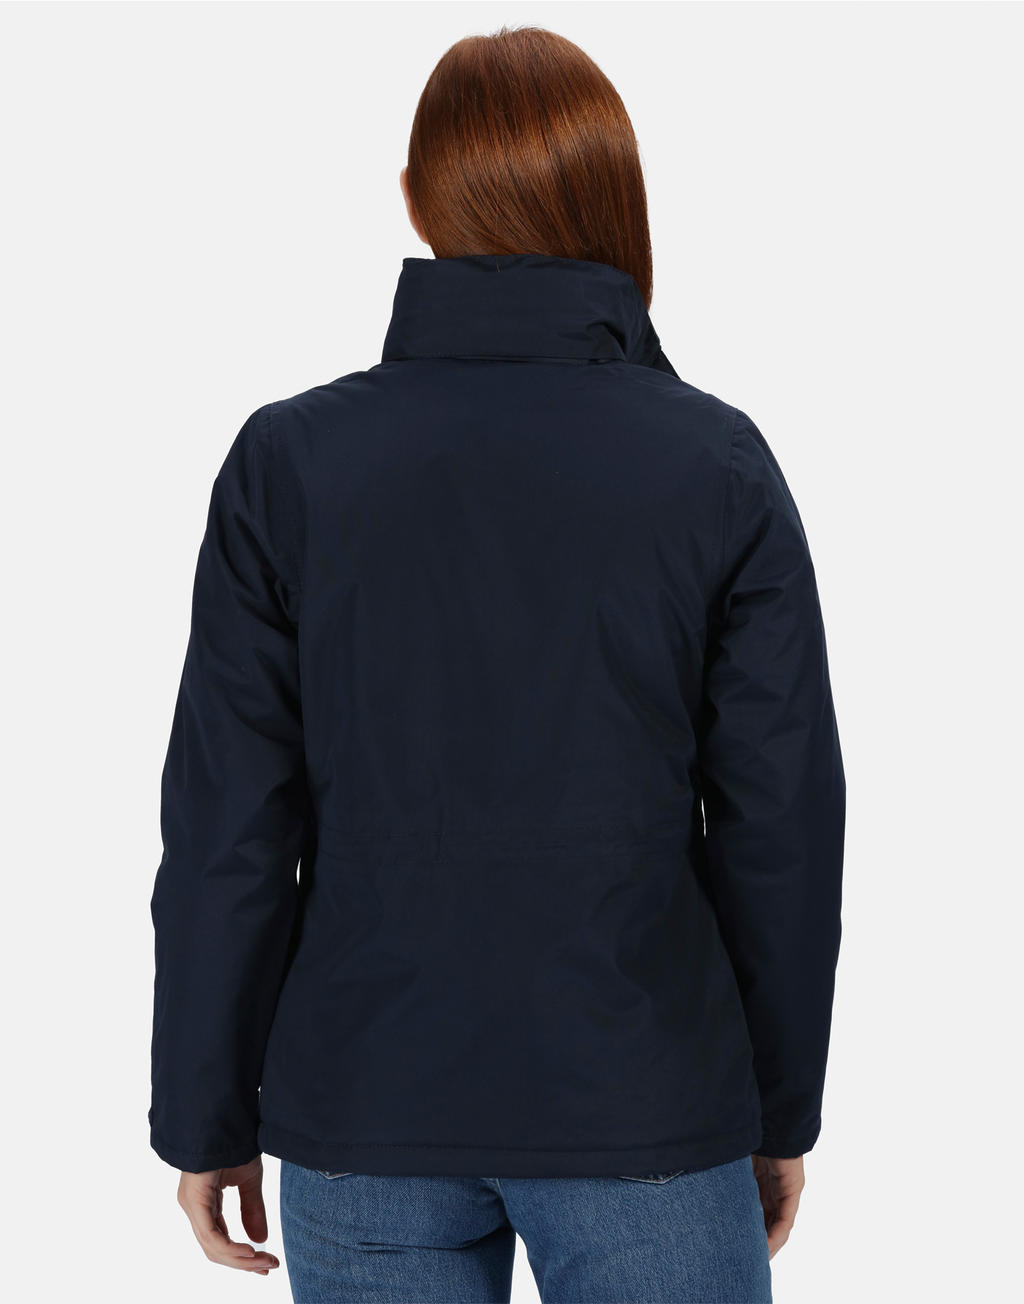  Ladies Beauford Insulated Jacket in Farbe Black